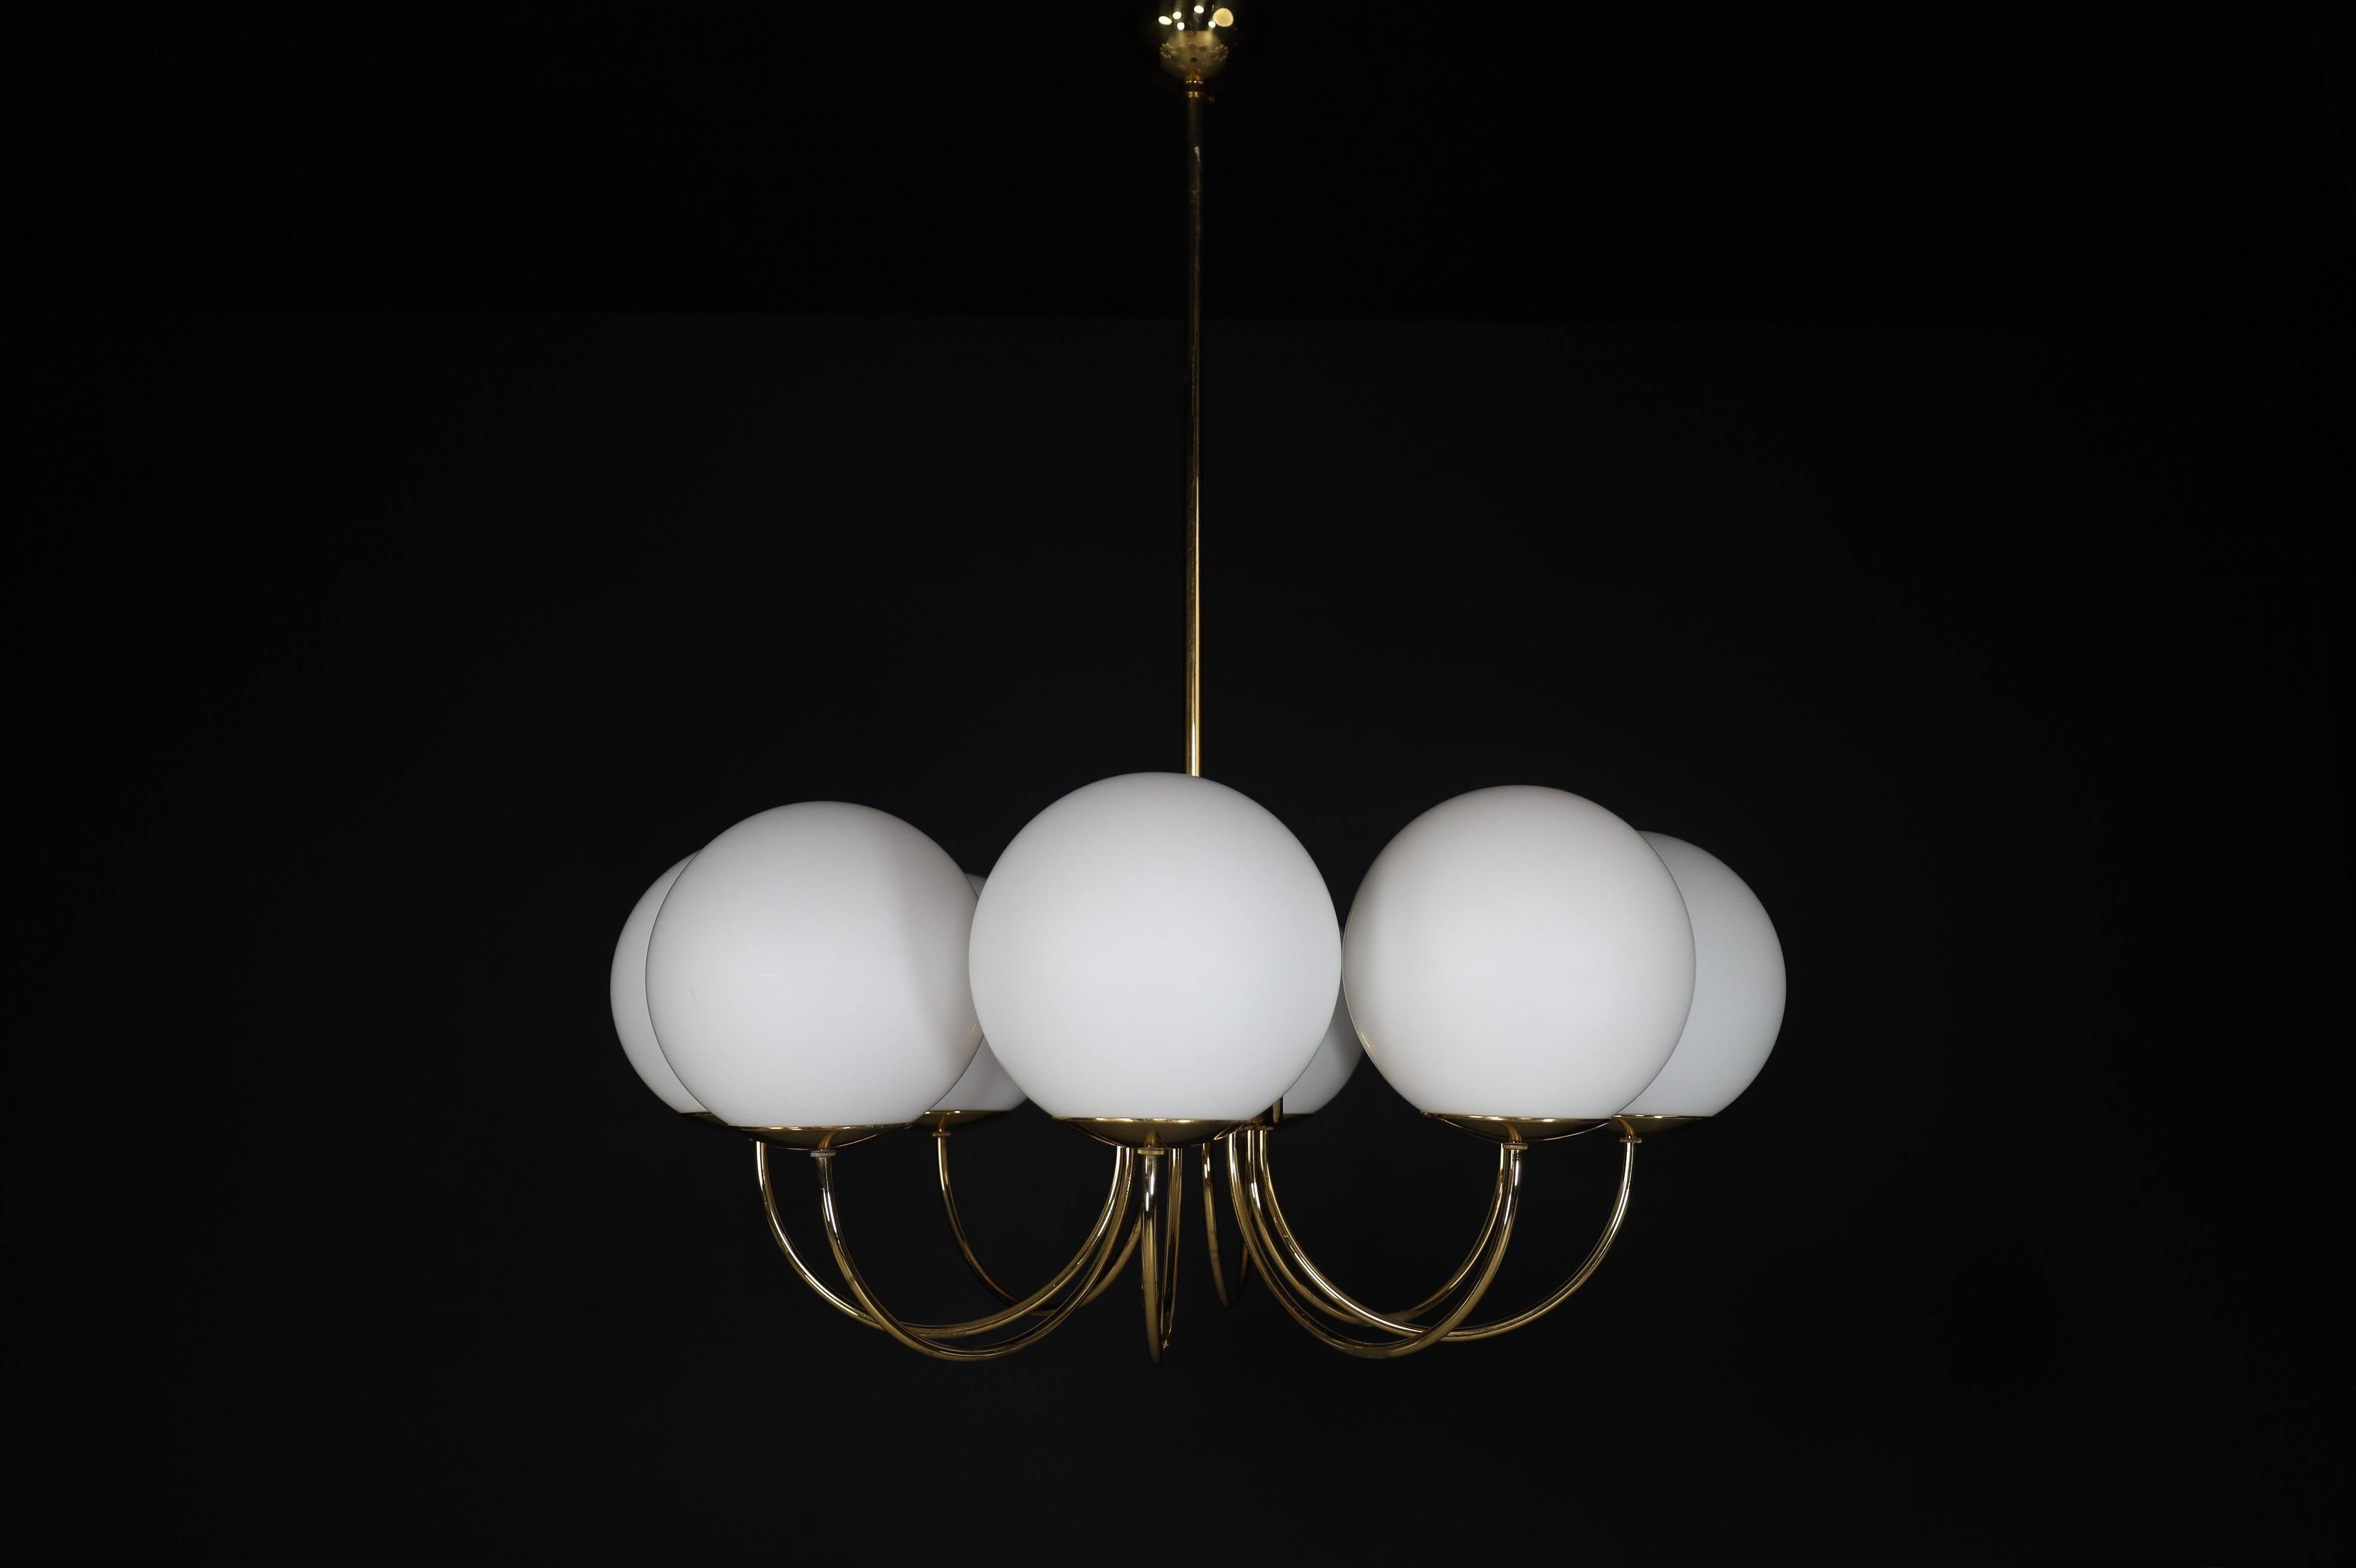 1 of 3 Elegant Chandeliers with Brass Fixture and Opaline Glass Globes, 1960s In Good Condition For Sale In Almelo, NL